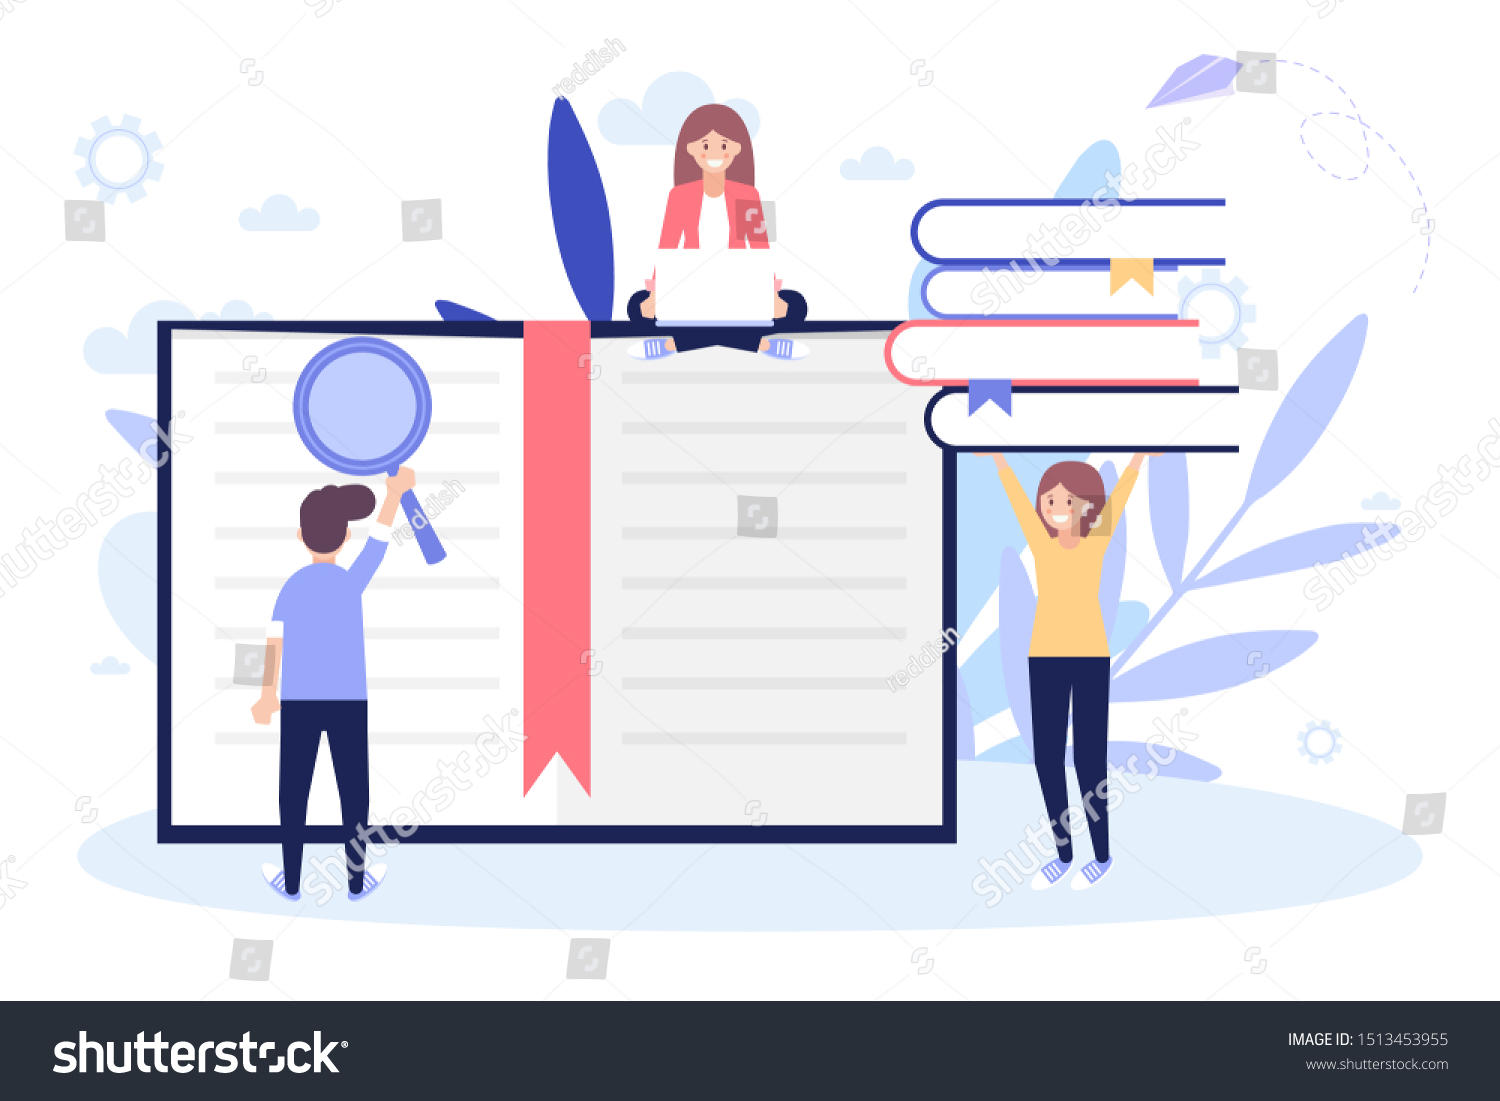 Education Online Learning Concept Cartoon Flat Stock Vector